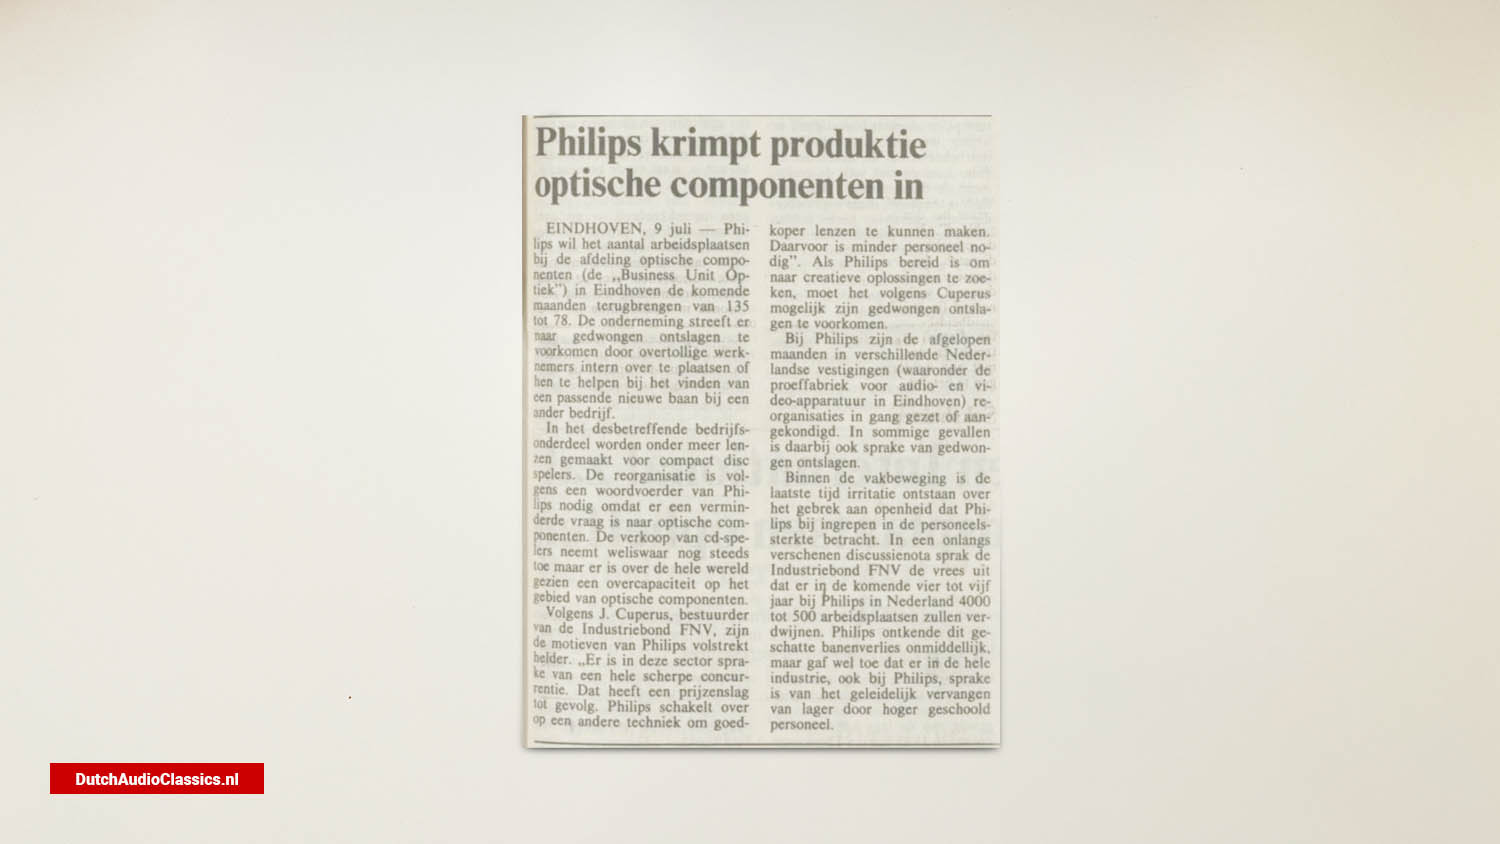 Philips cuts production of optical components